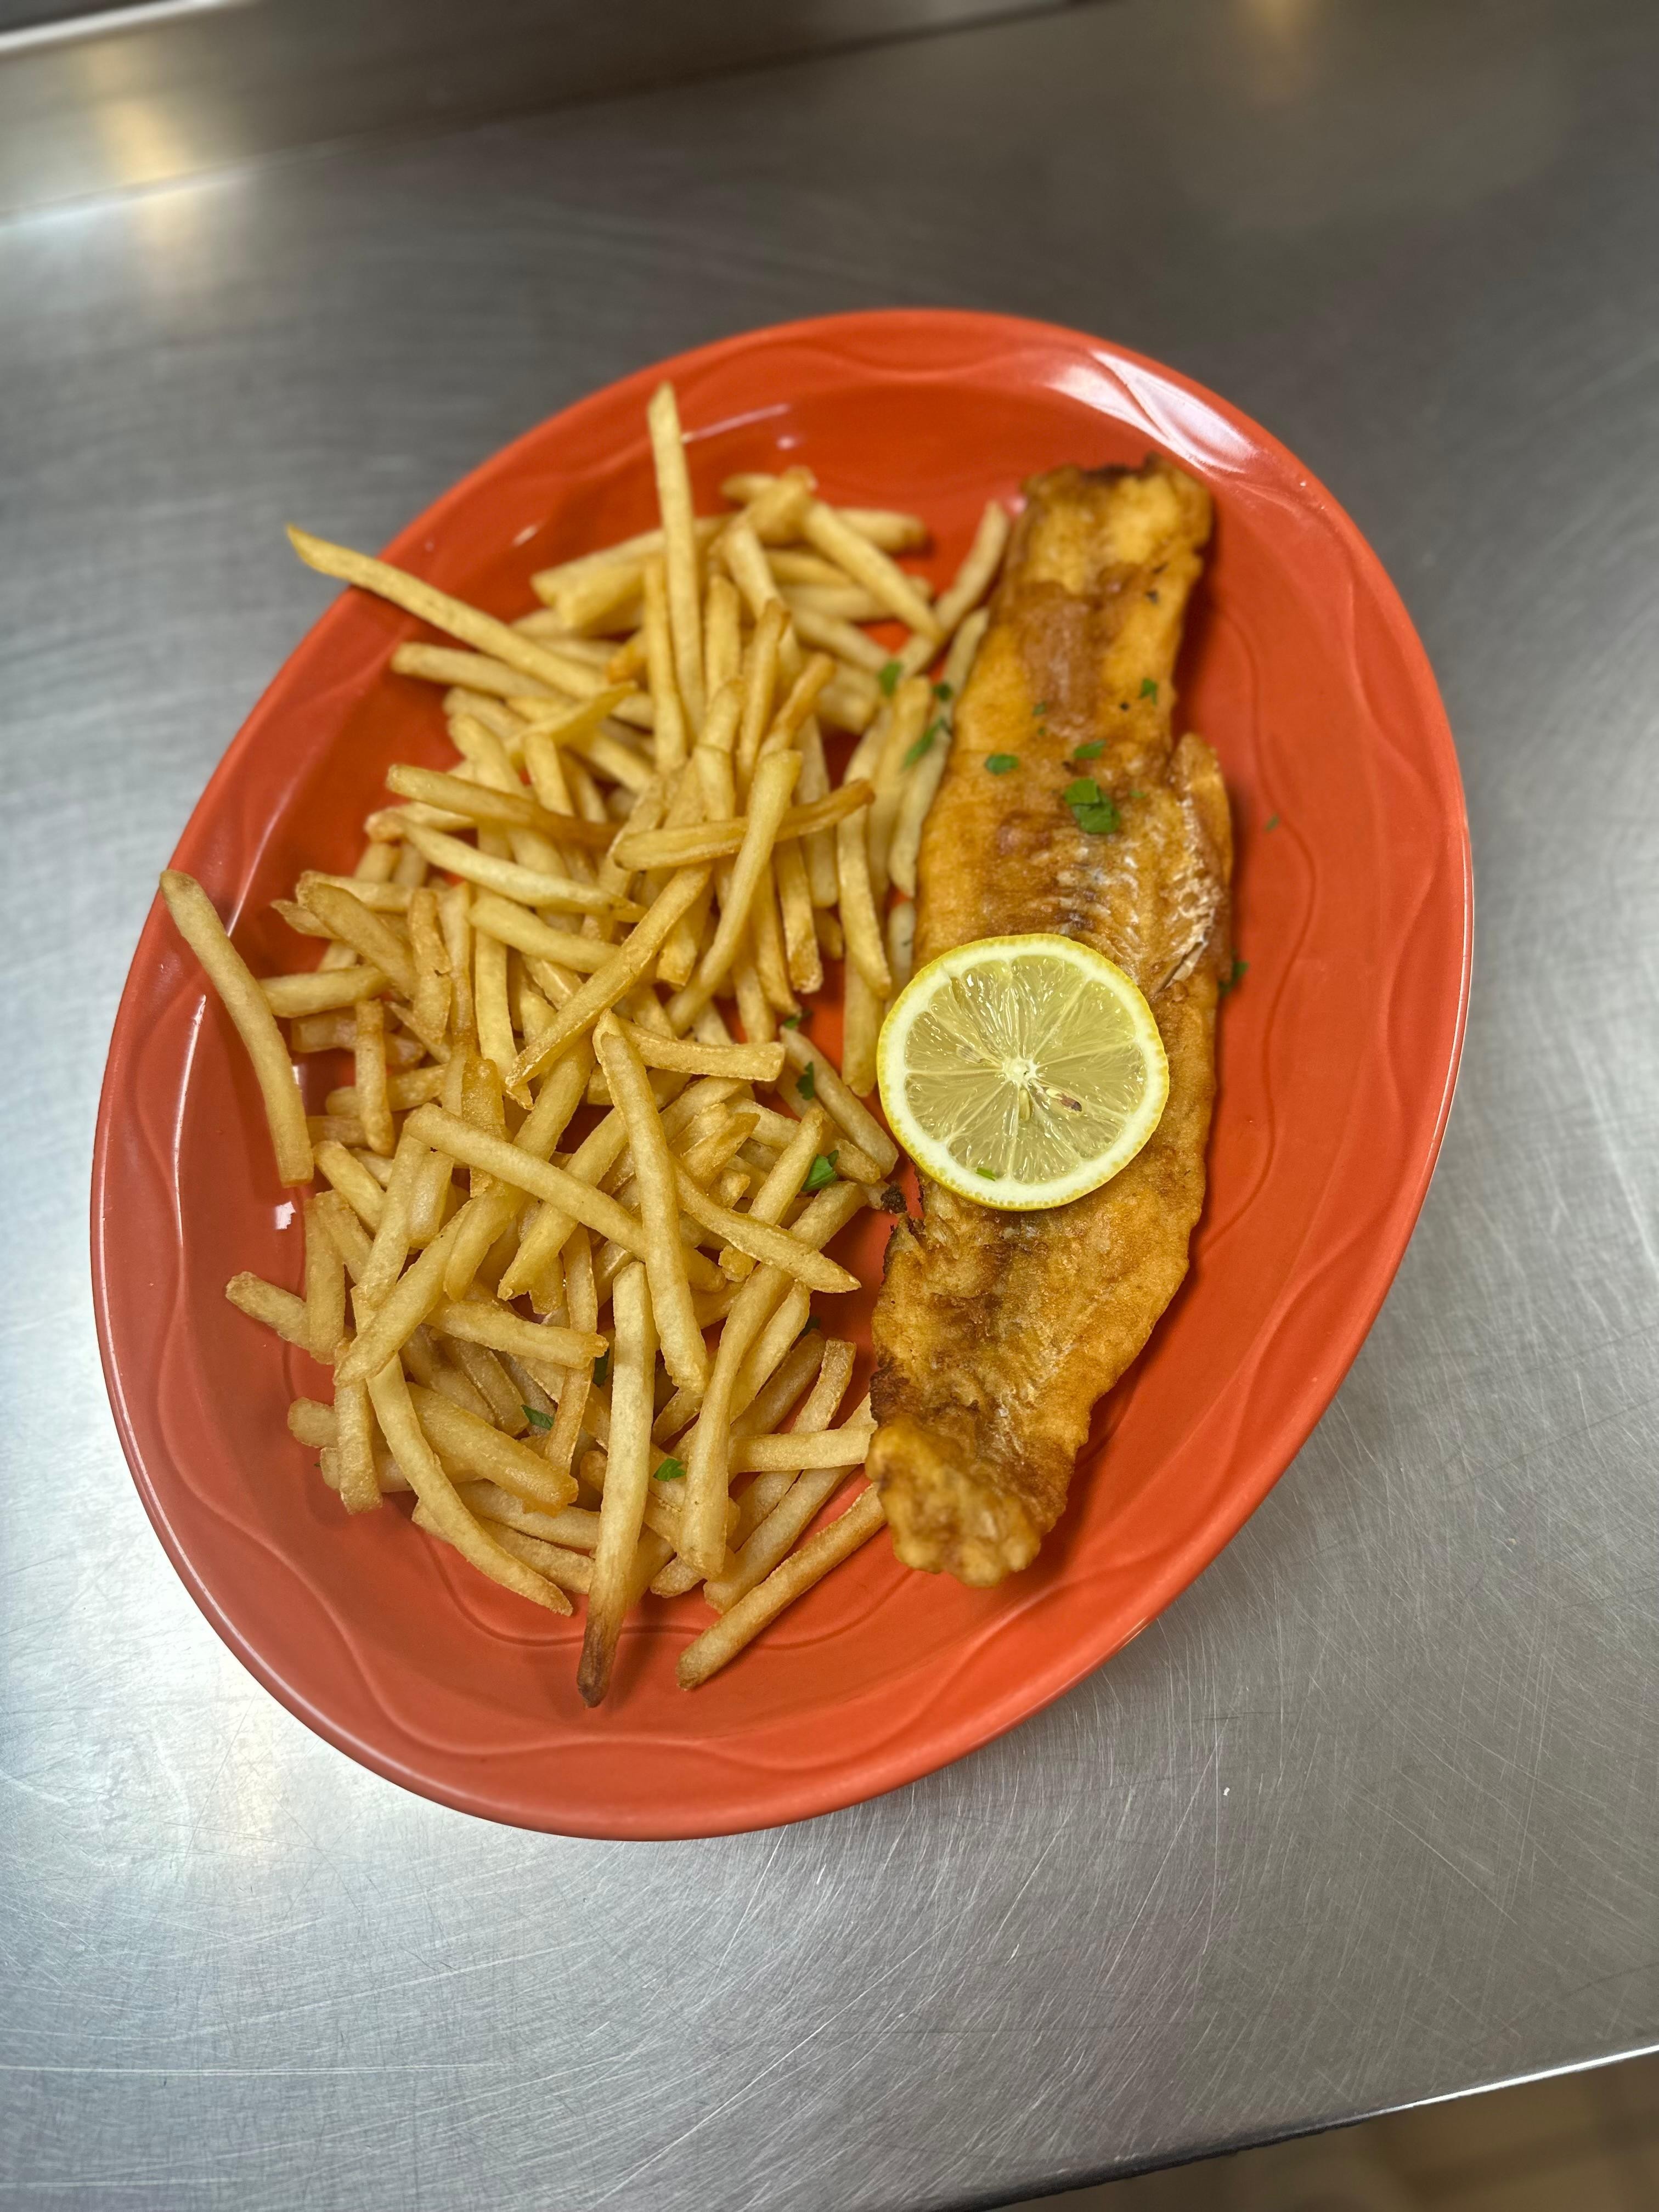 Friday - Fish with French Fries